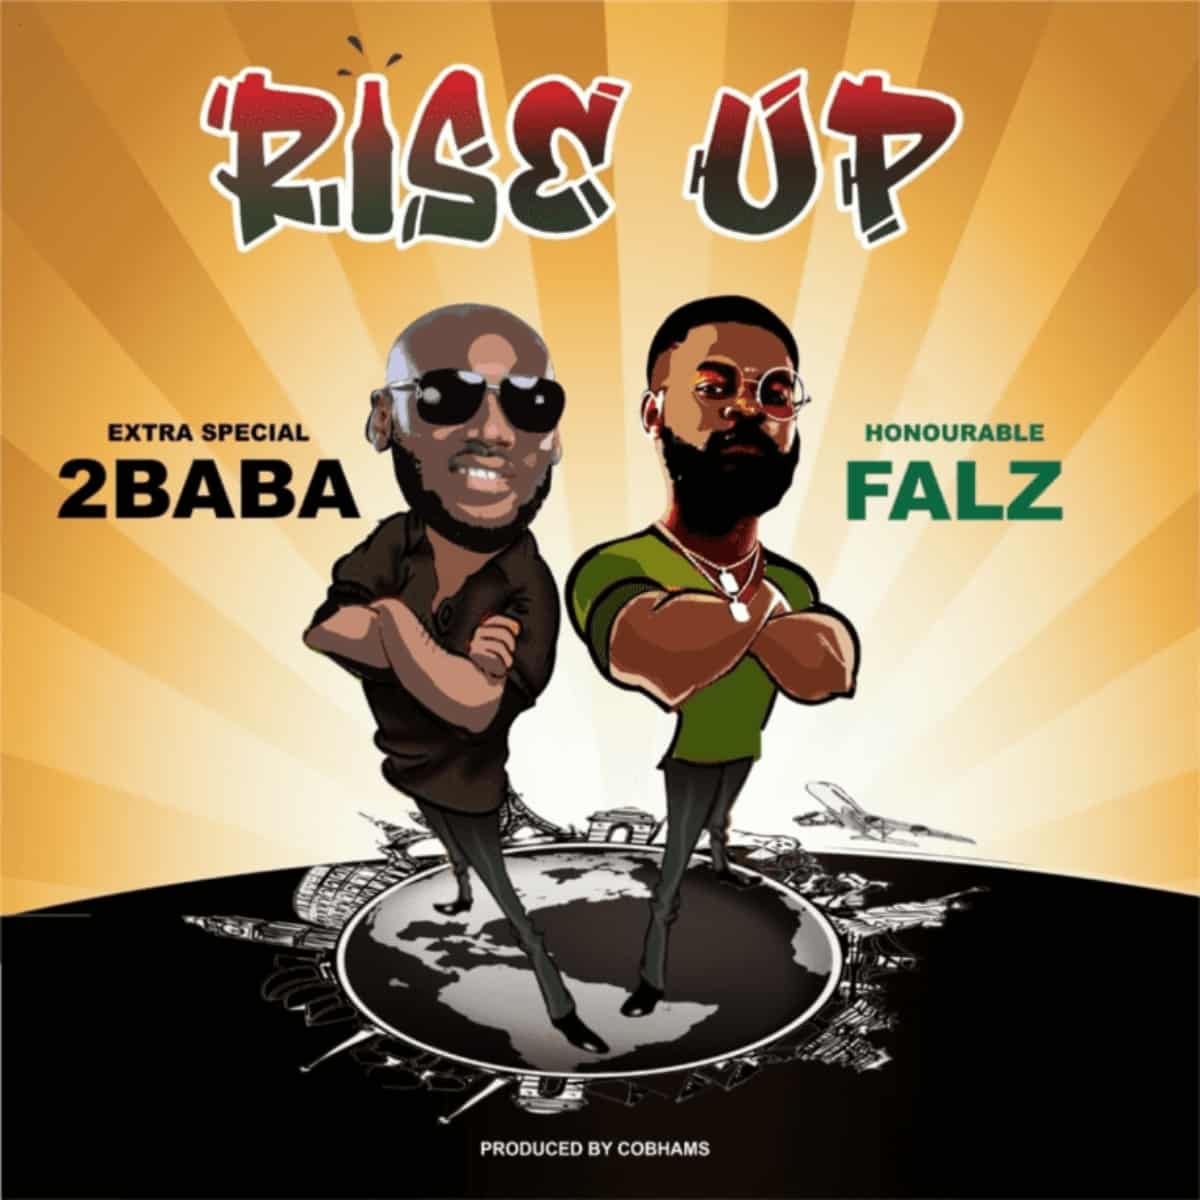 DOWNLOAD: 2Baba x Falz – “Rise Up” Mp3